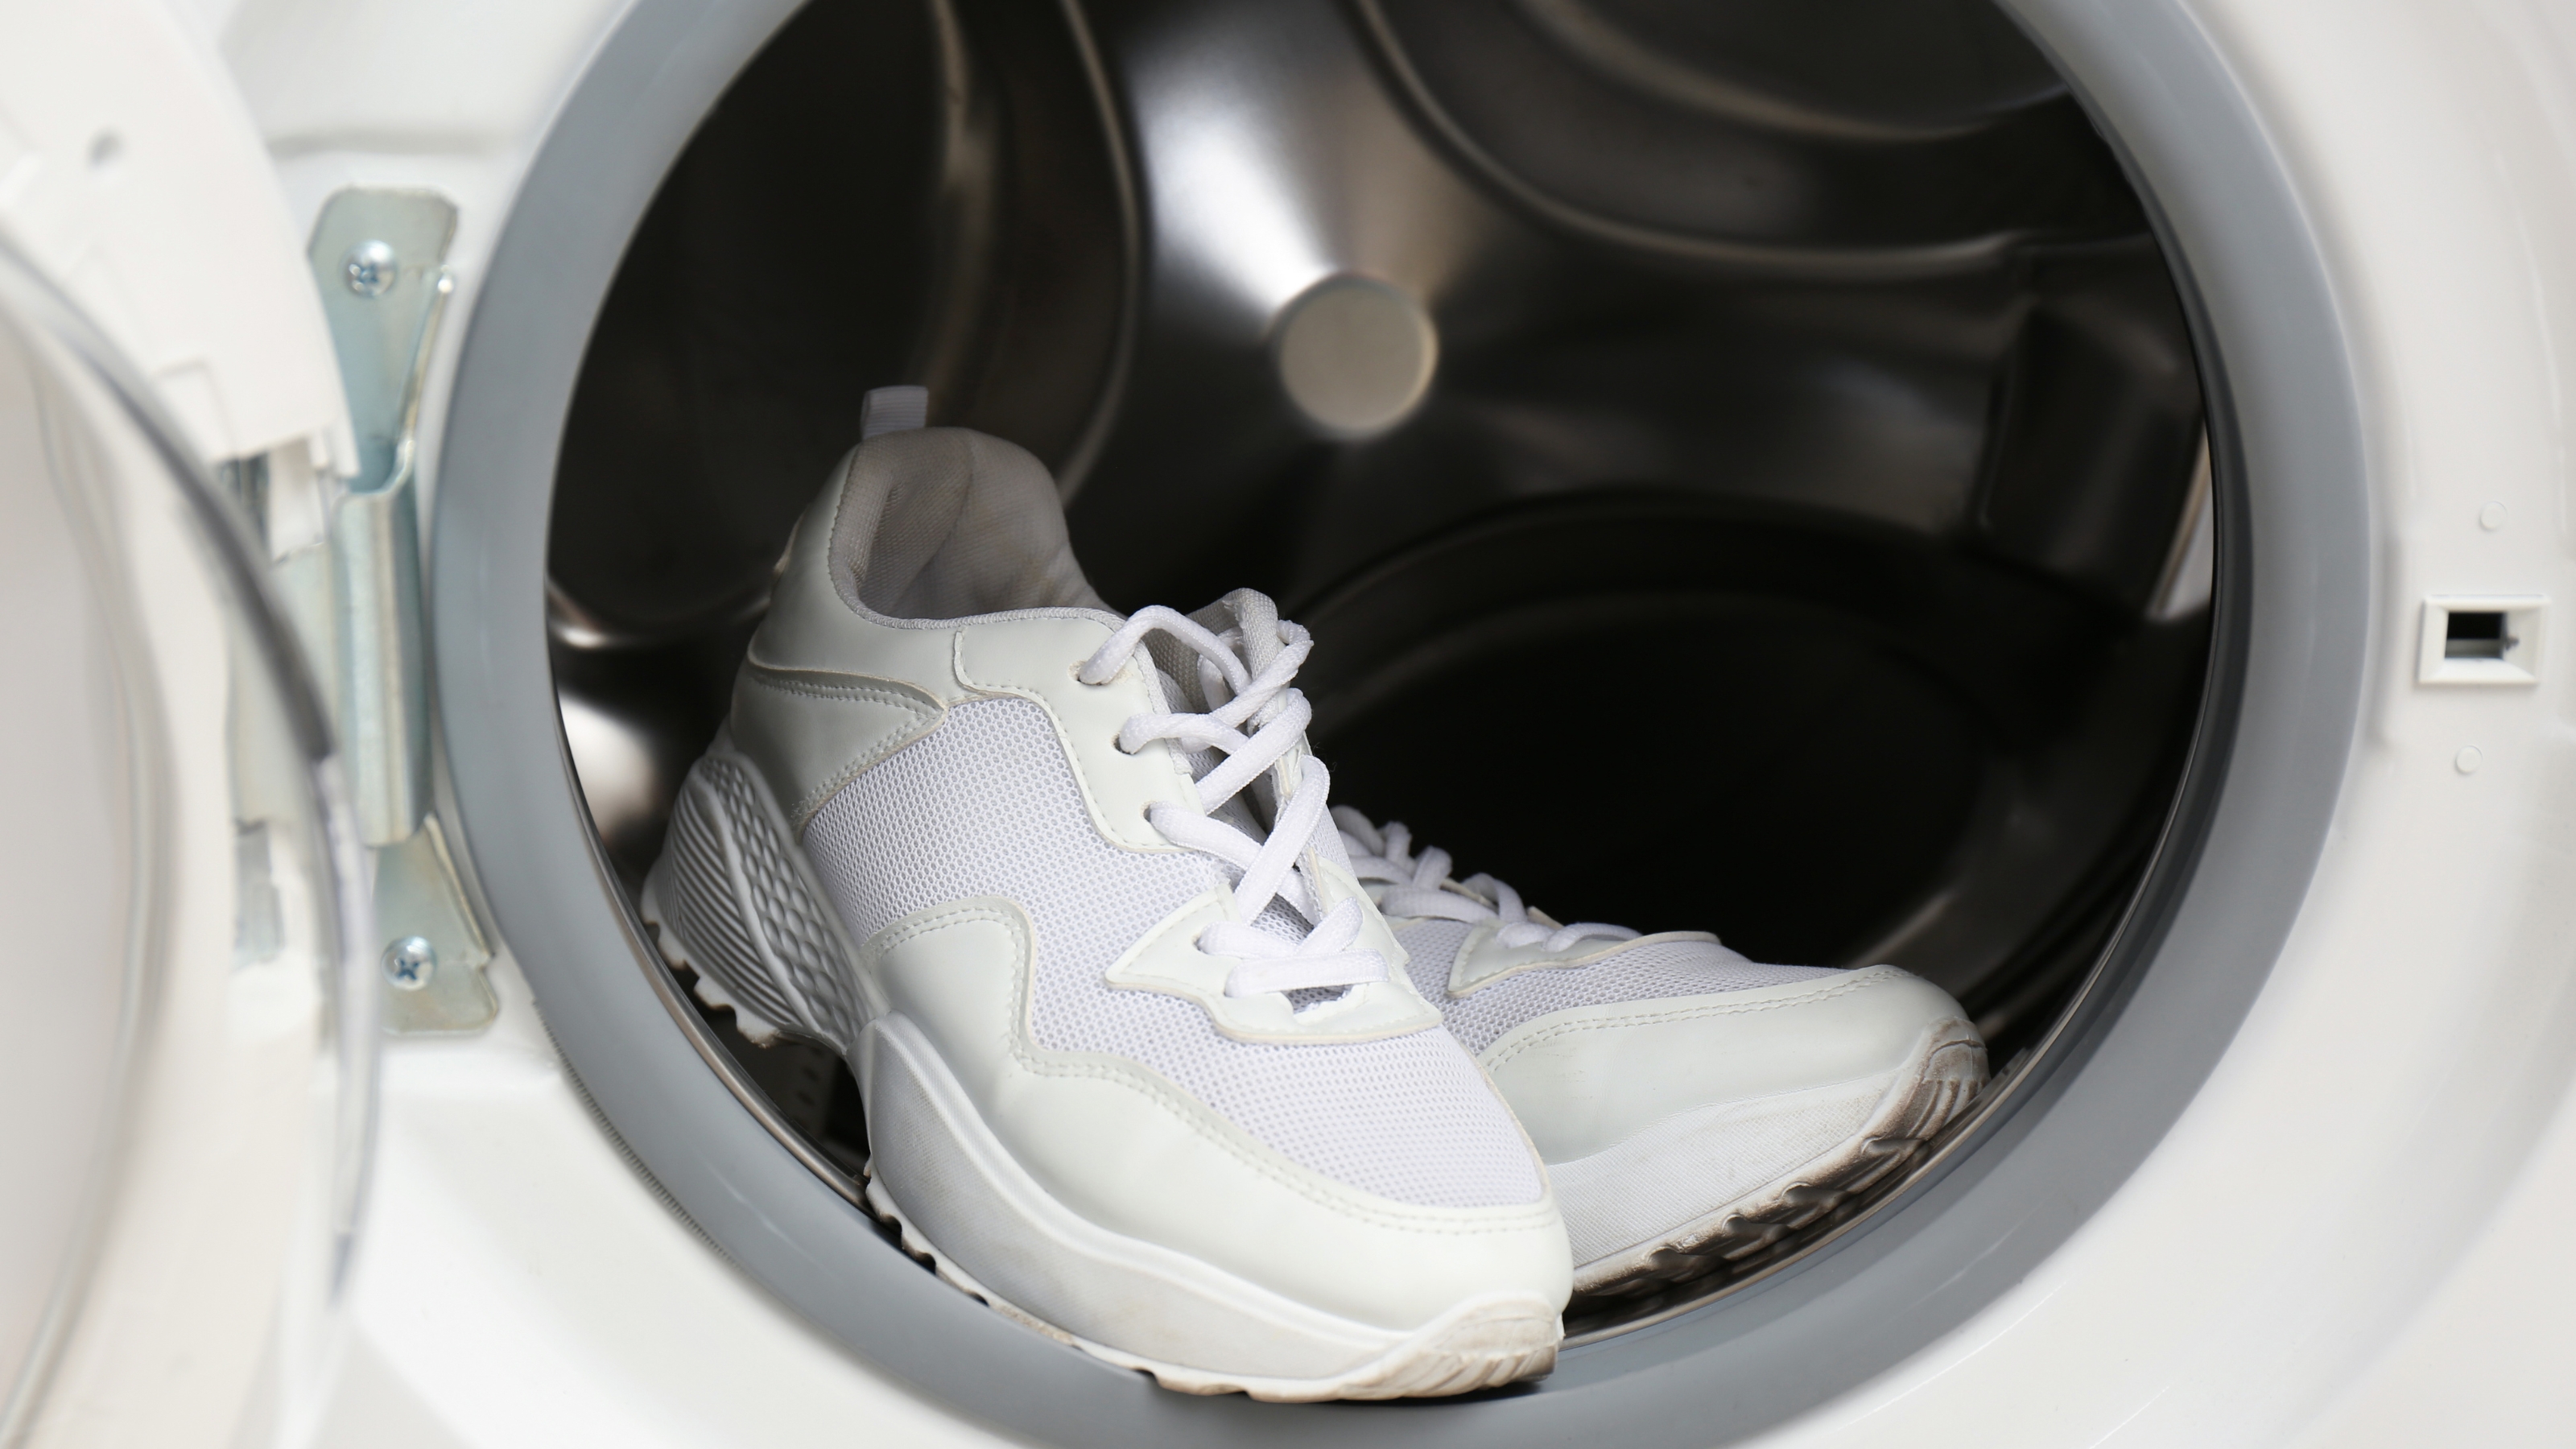 How often to clean your shoes, according to experts